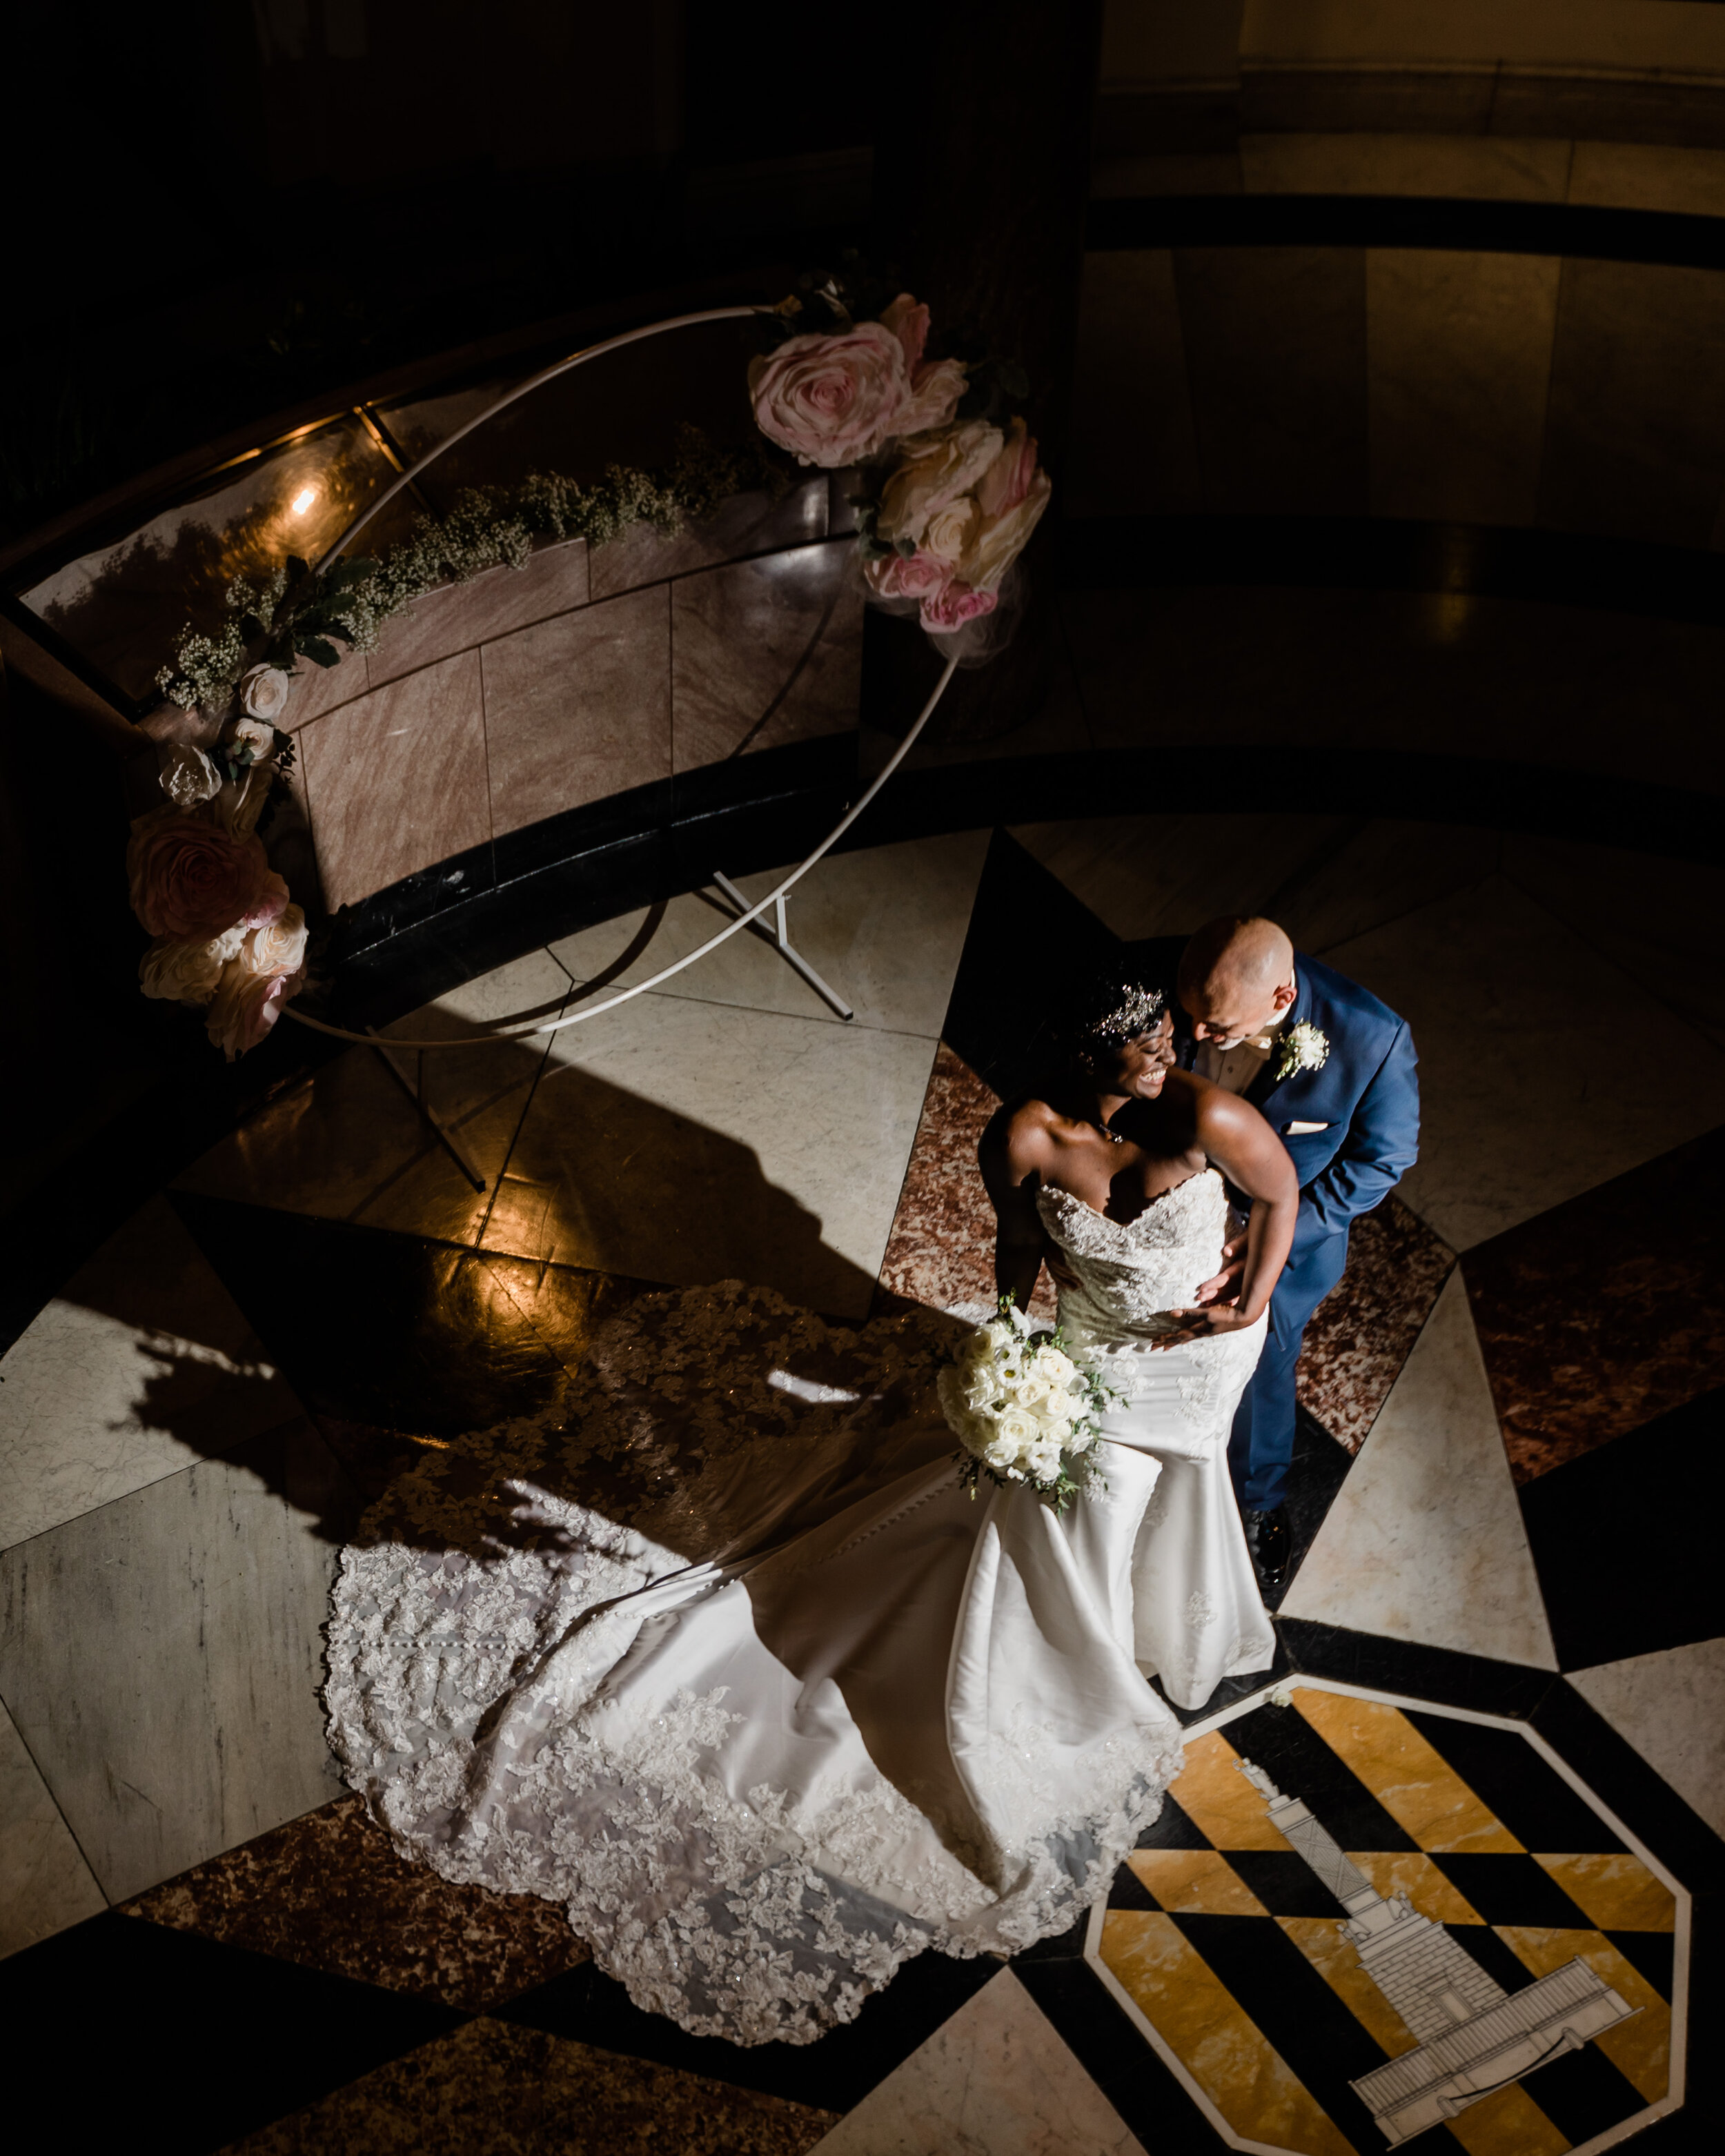 get married in baltimore city hall shot by megapixels media biracial couple wedding photographers maryland-86.jpg